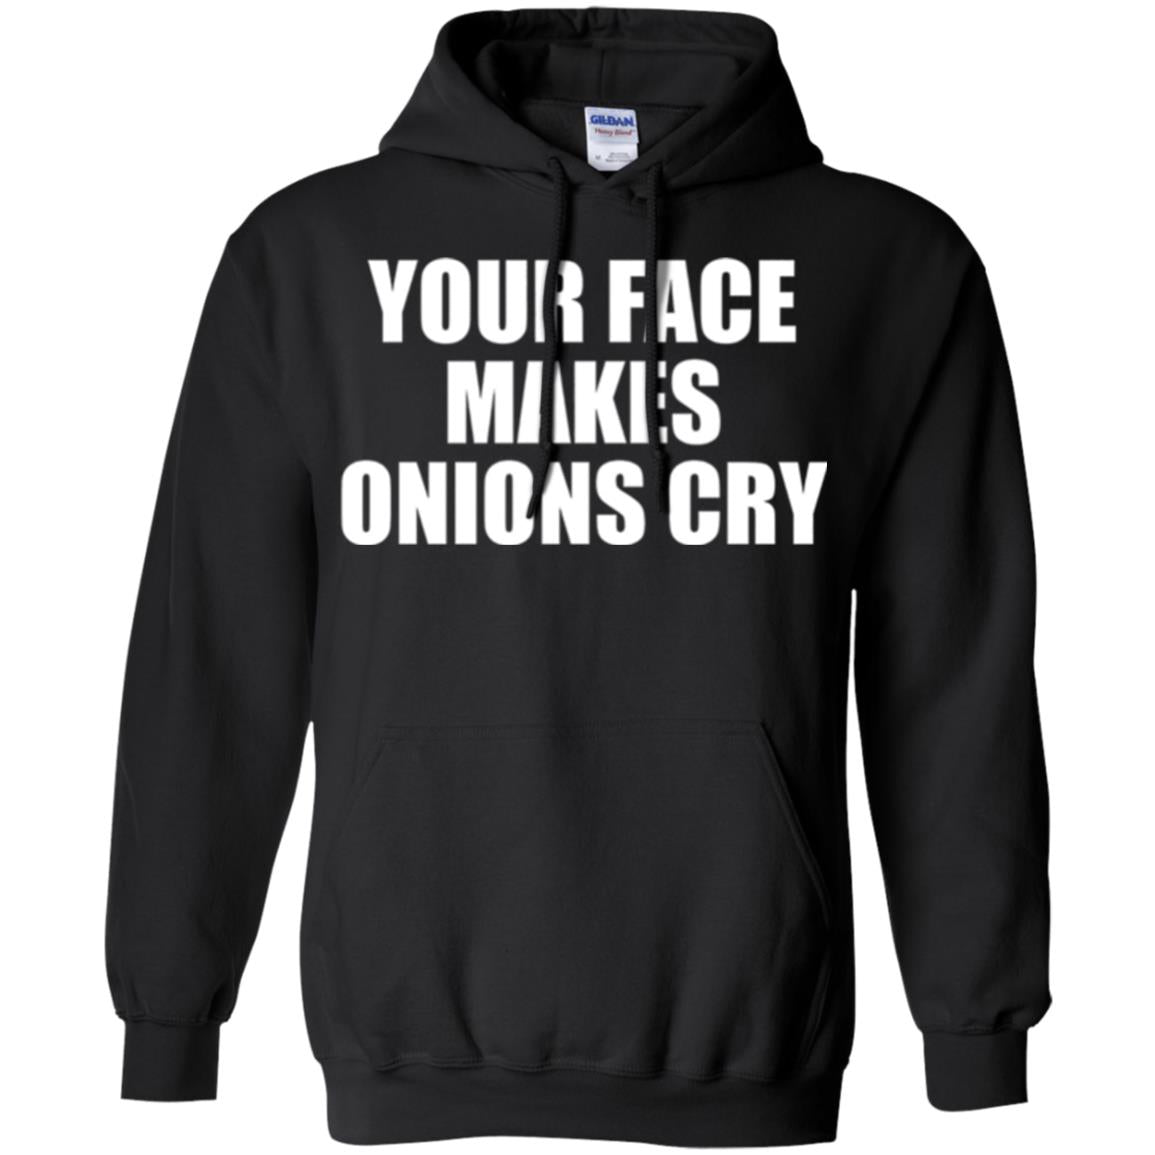 Your Face Makes Onions Cry T-shirt